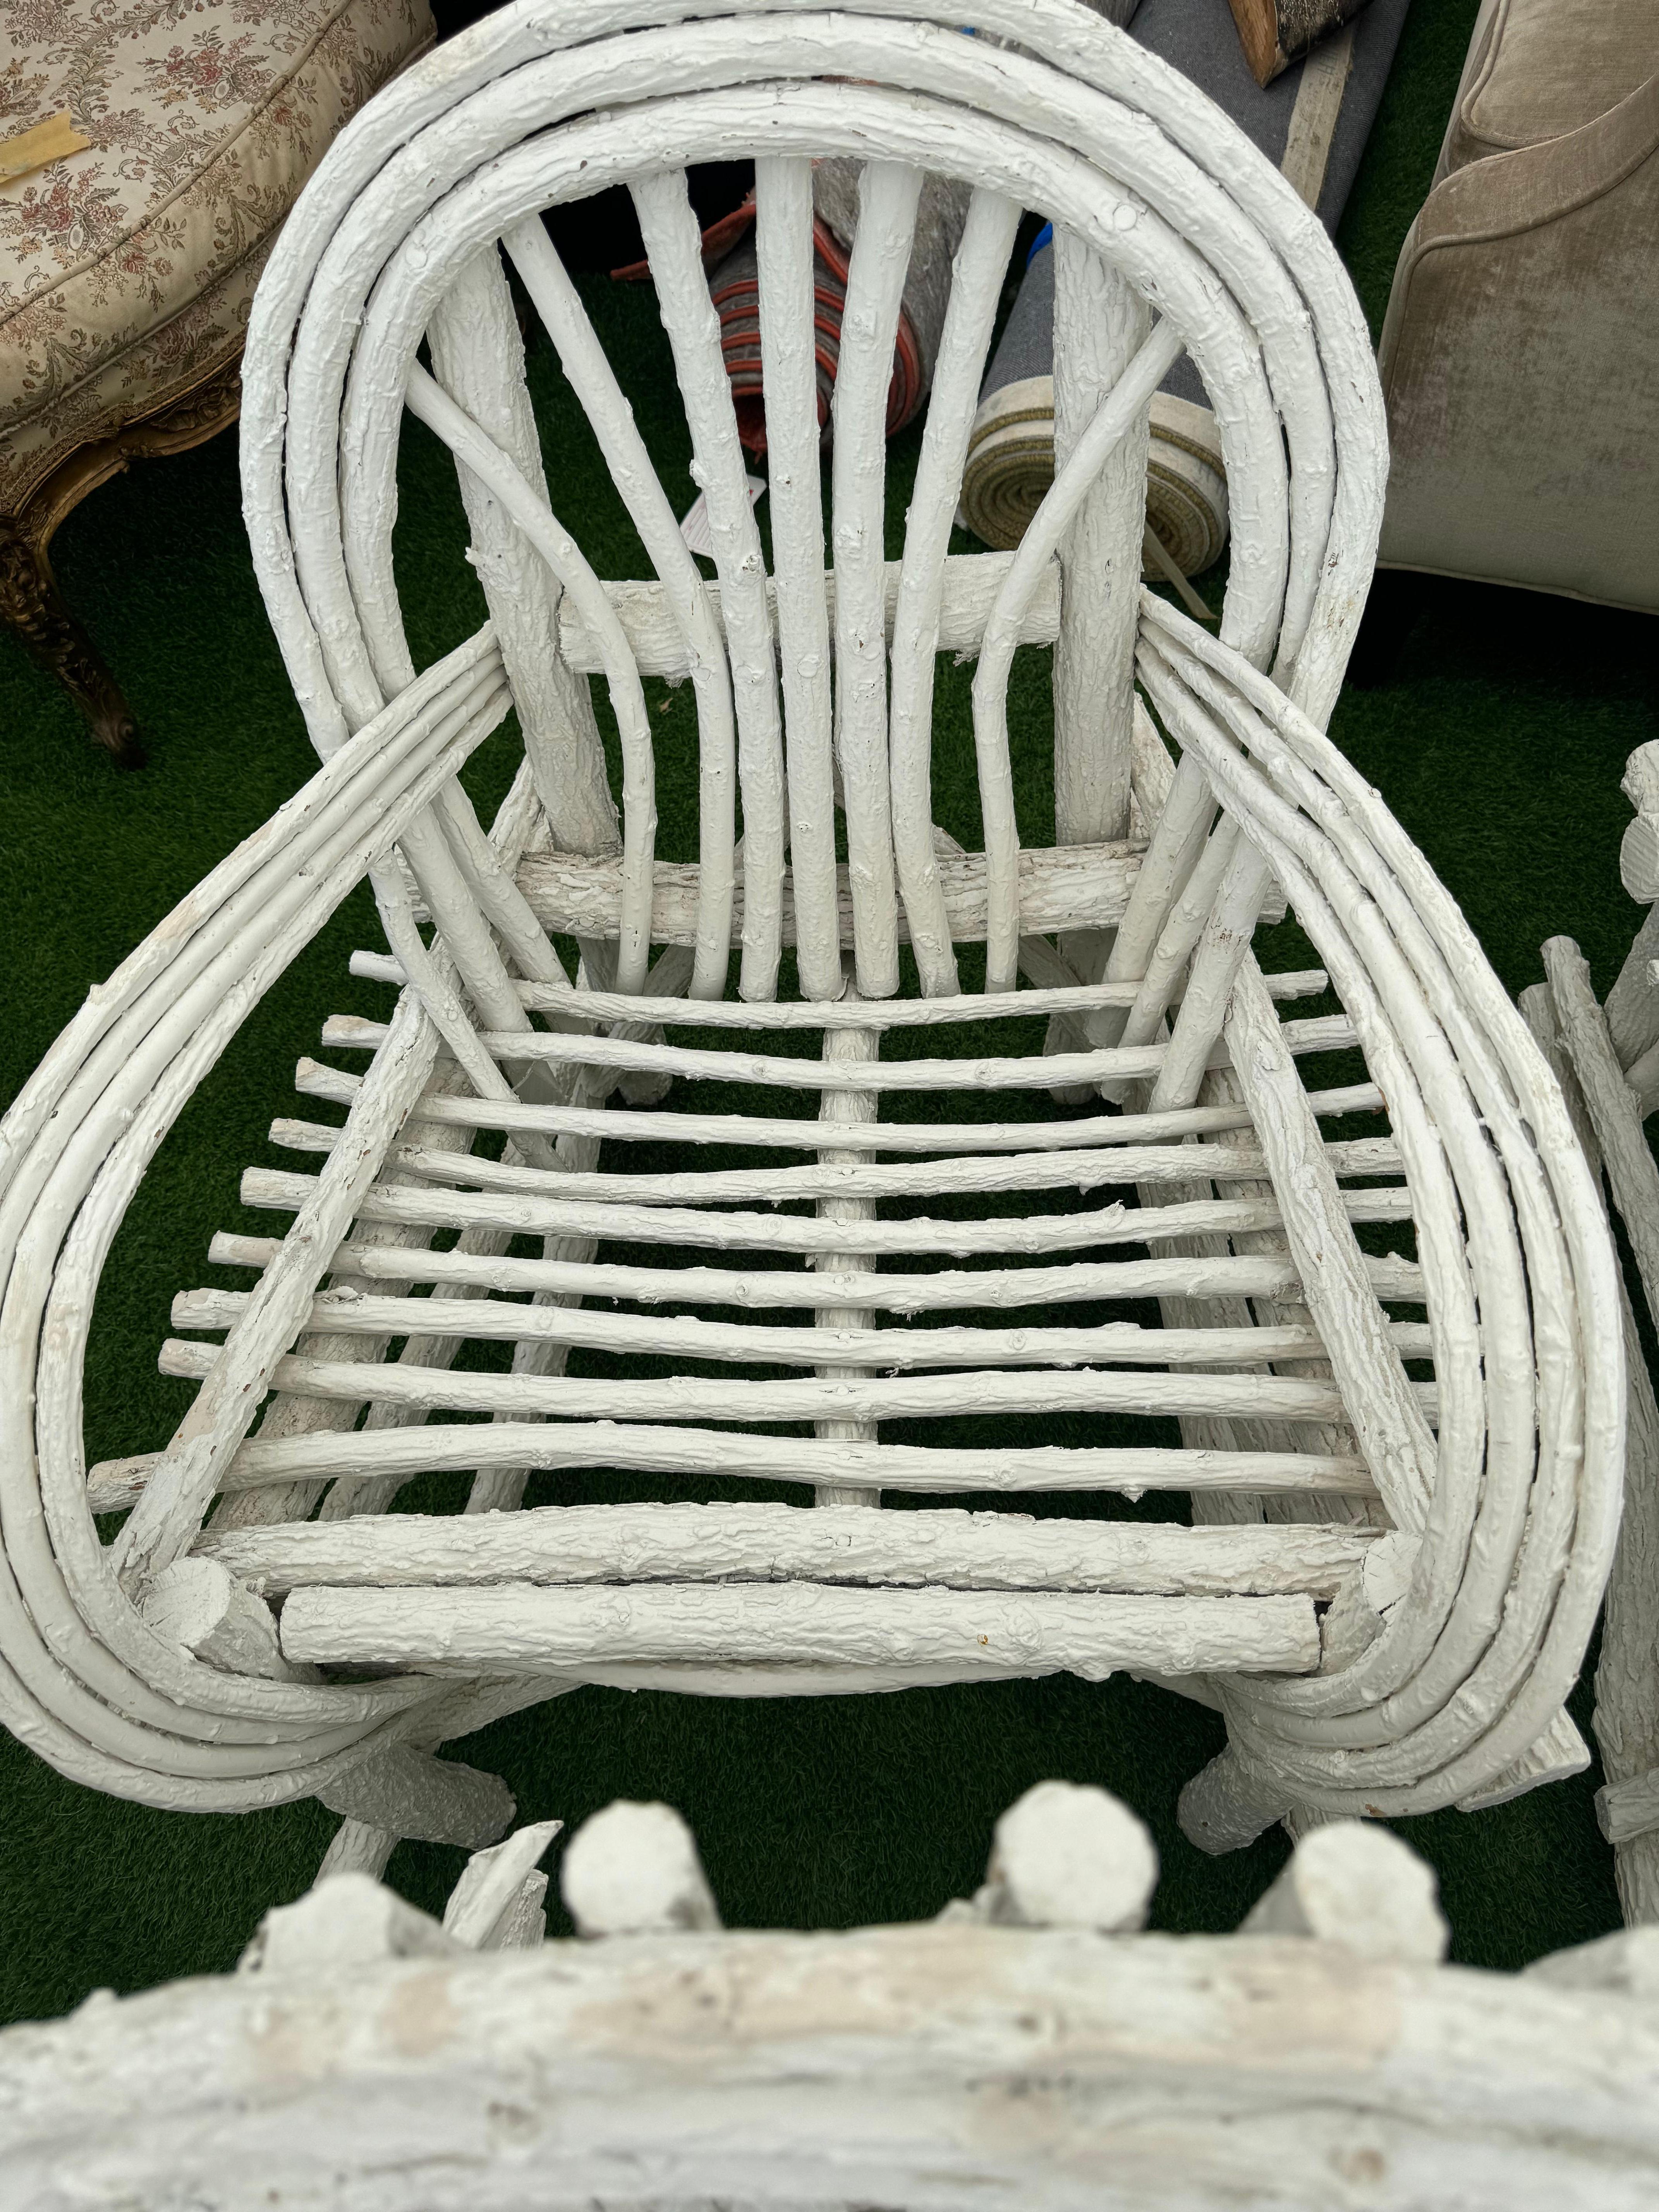 These amazing chairs are made of twigs and branches. The were well thought out and creatively designed. They vary in sizes from 25” wide to 30” wide. The height varies as well. Around 34-36”. They are being sold per item so you may purchase as few